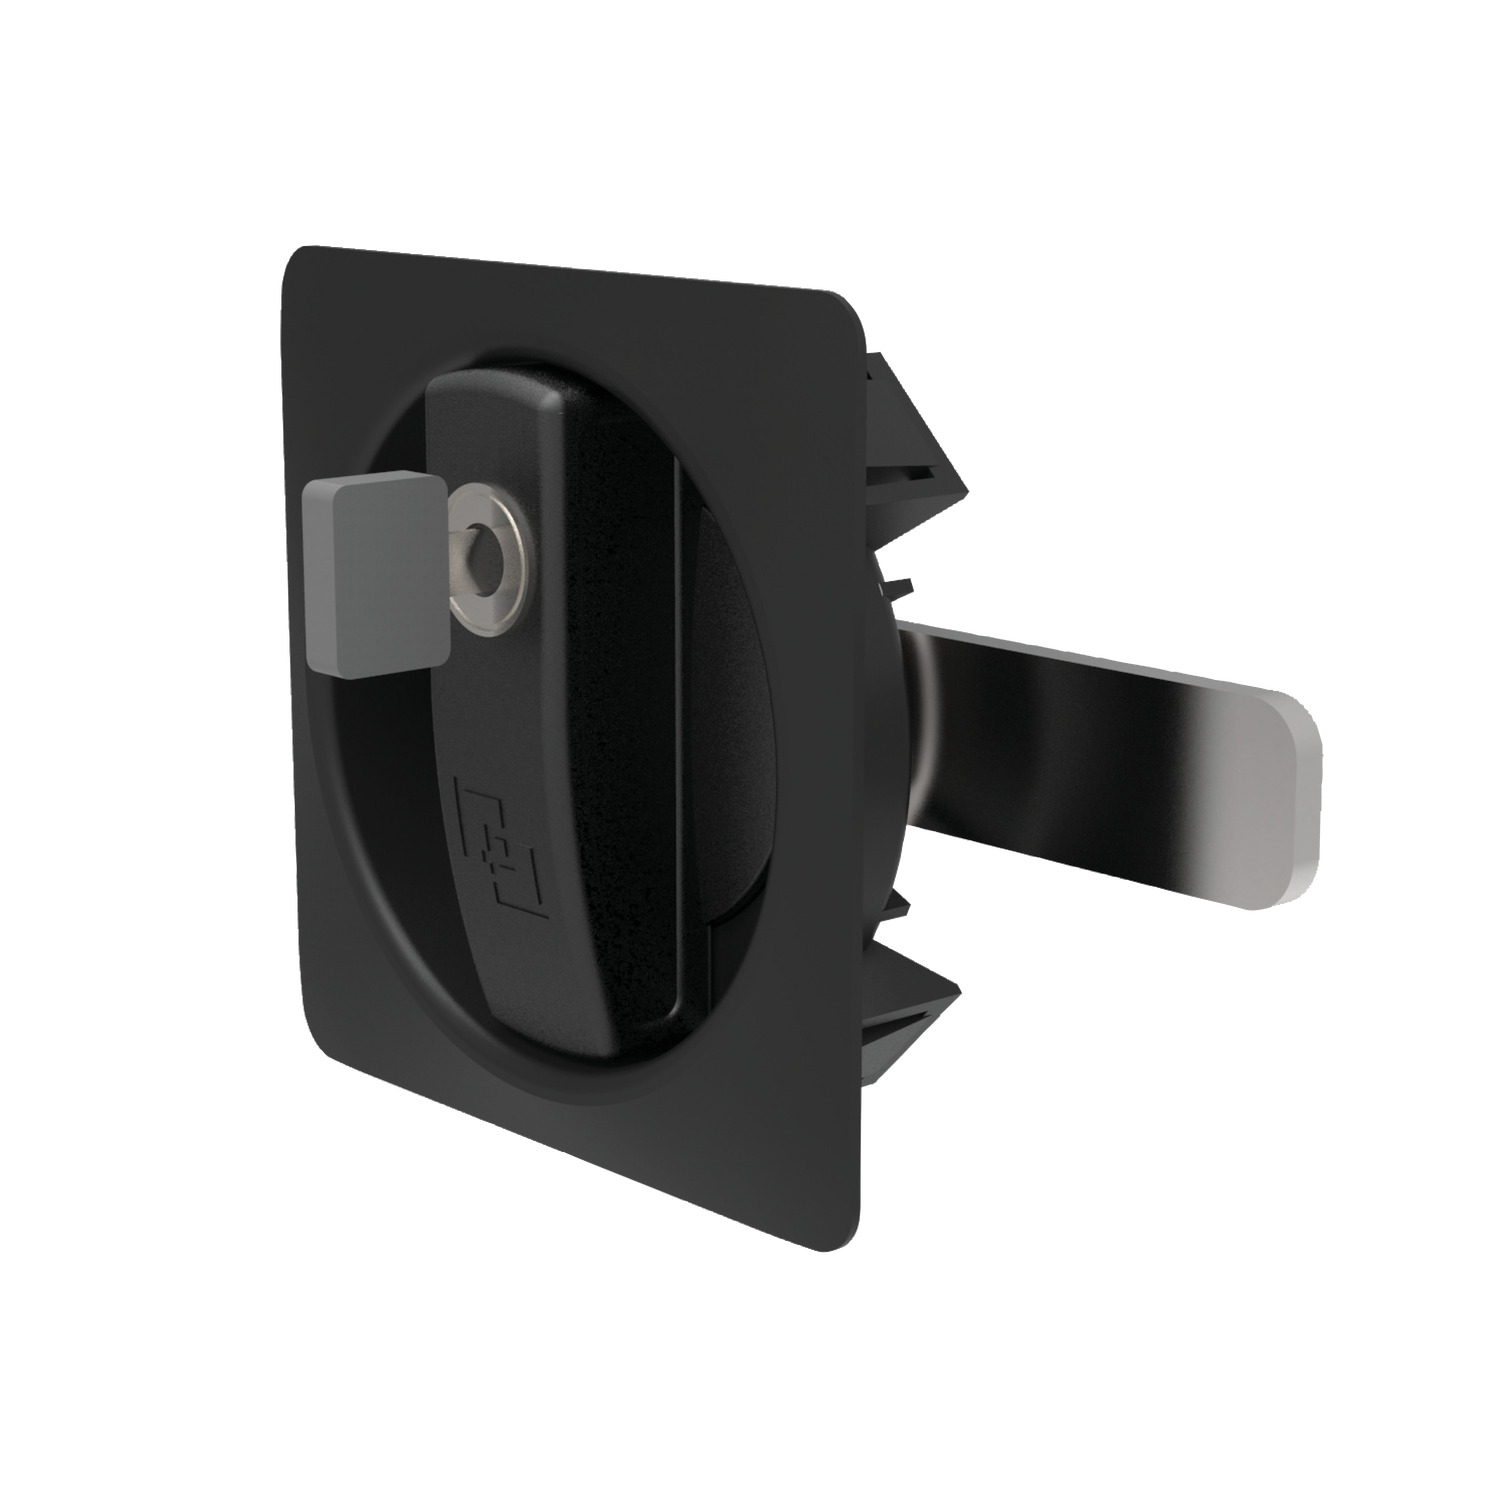 Product B4510, Cabinet Lock - Snap in Recessed handle, cylinder lock, polyamide / 